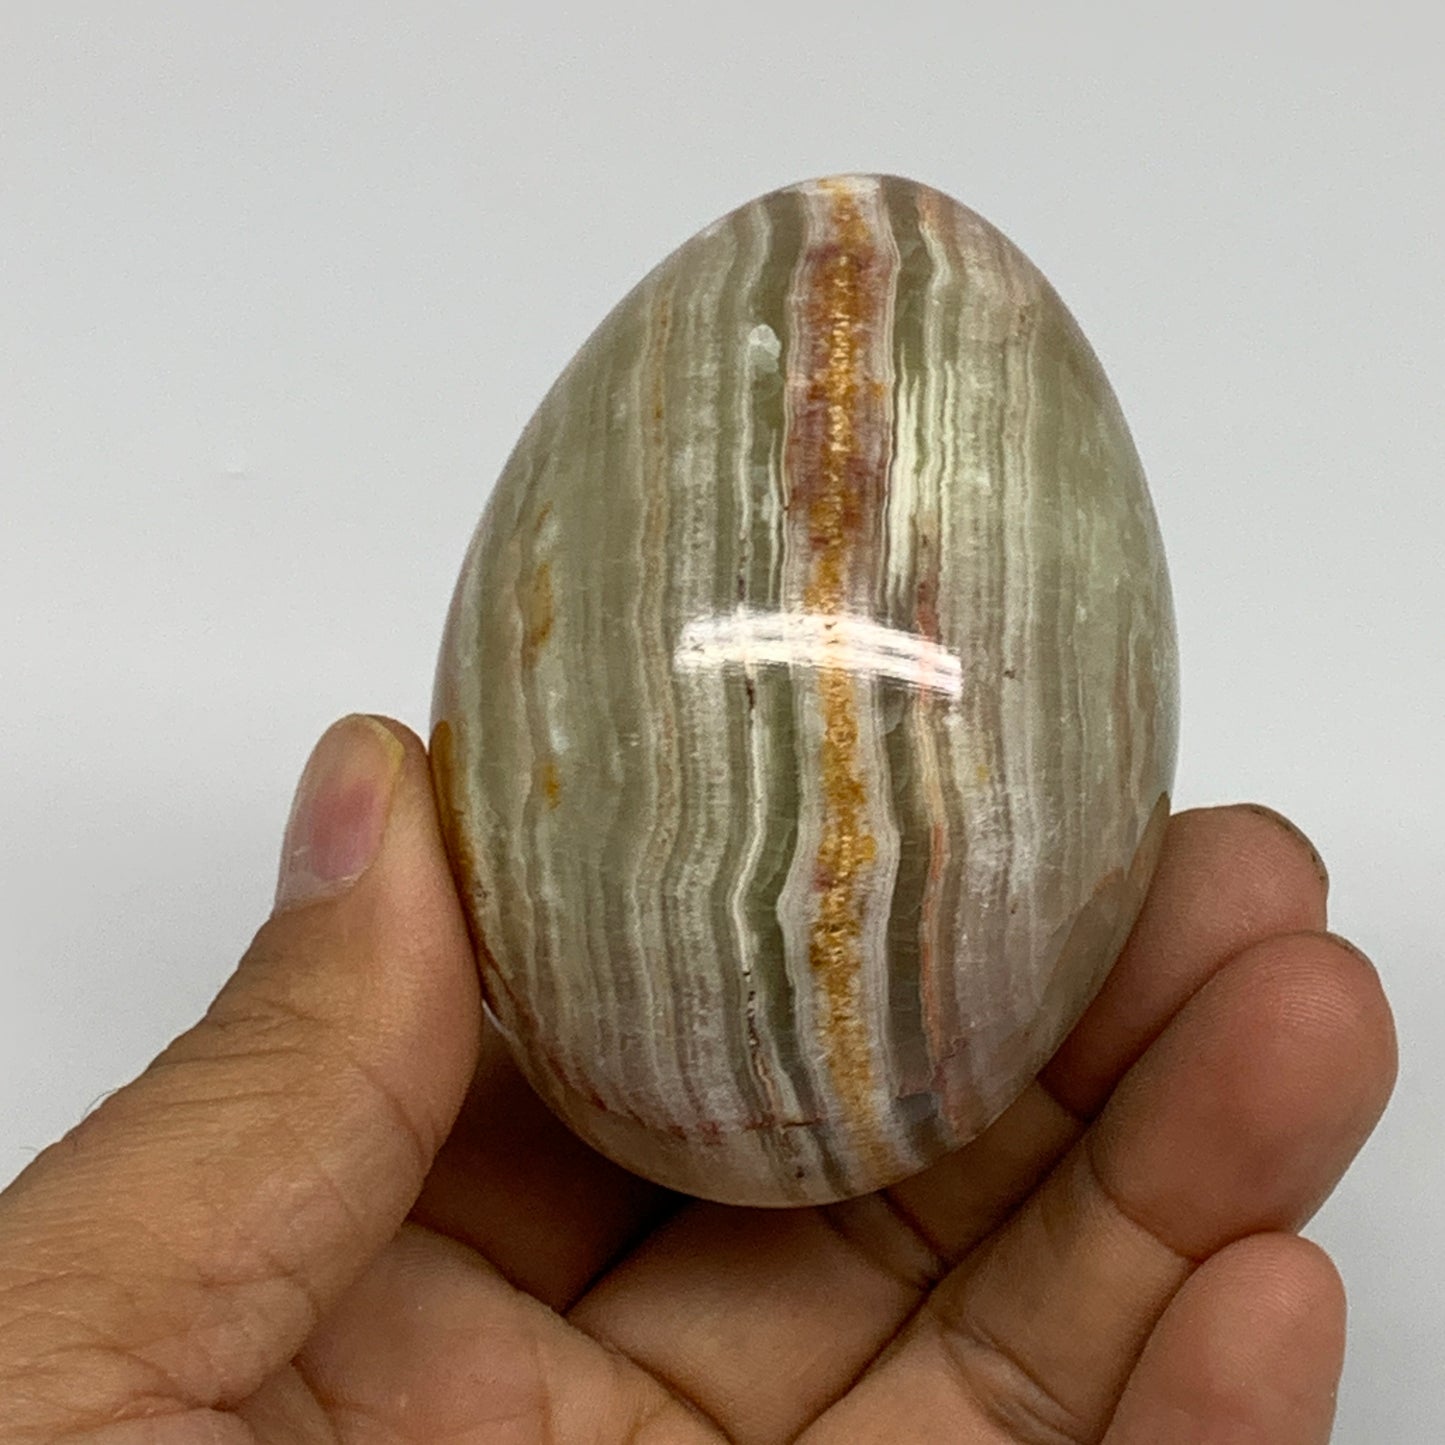 239.9g, 2.7"x2" Natural Green Onyx Egg Gemstone Mineral, from Pakistan, B32043